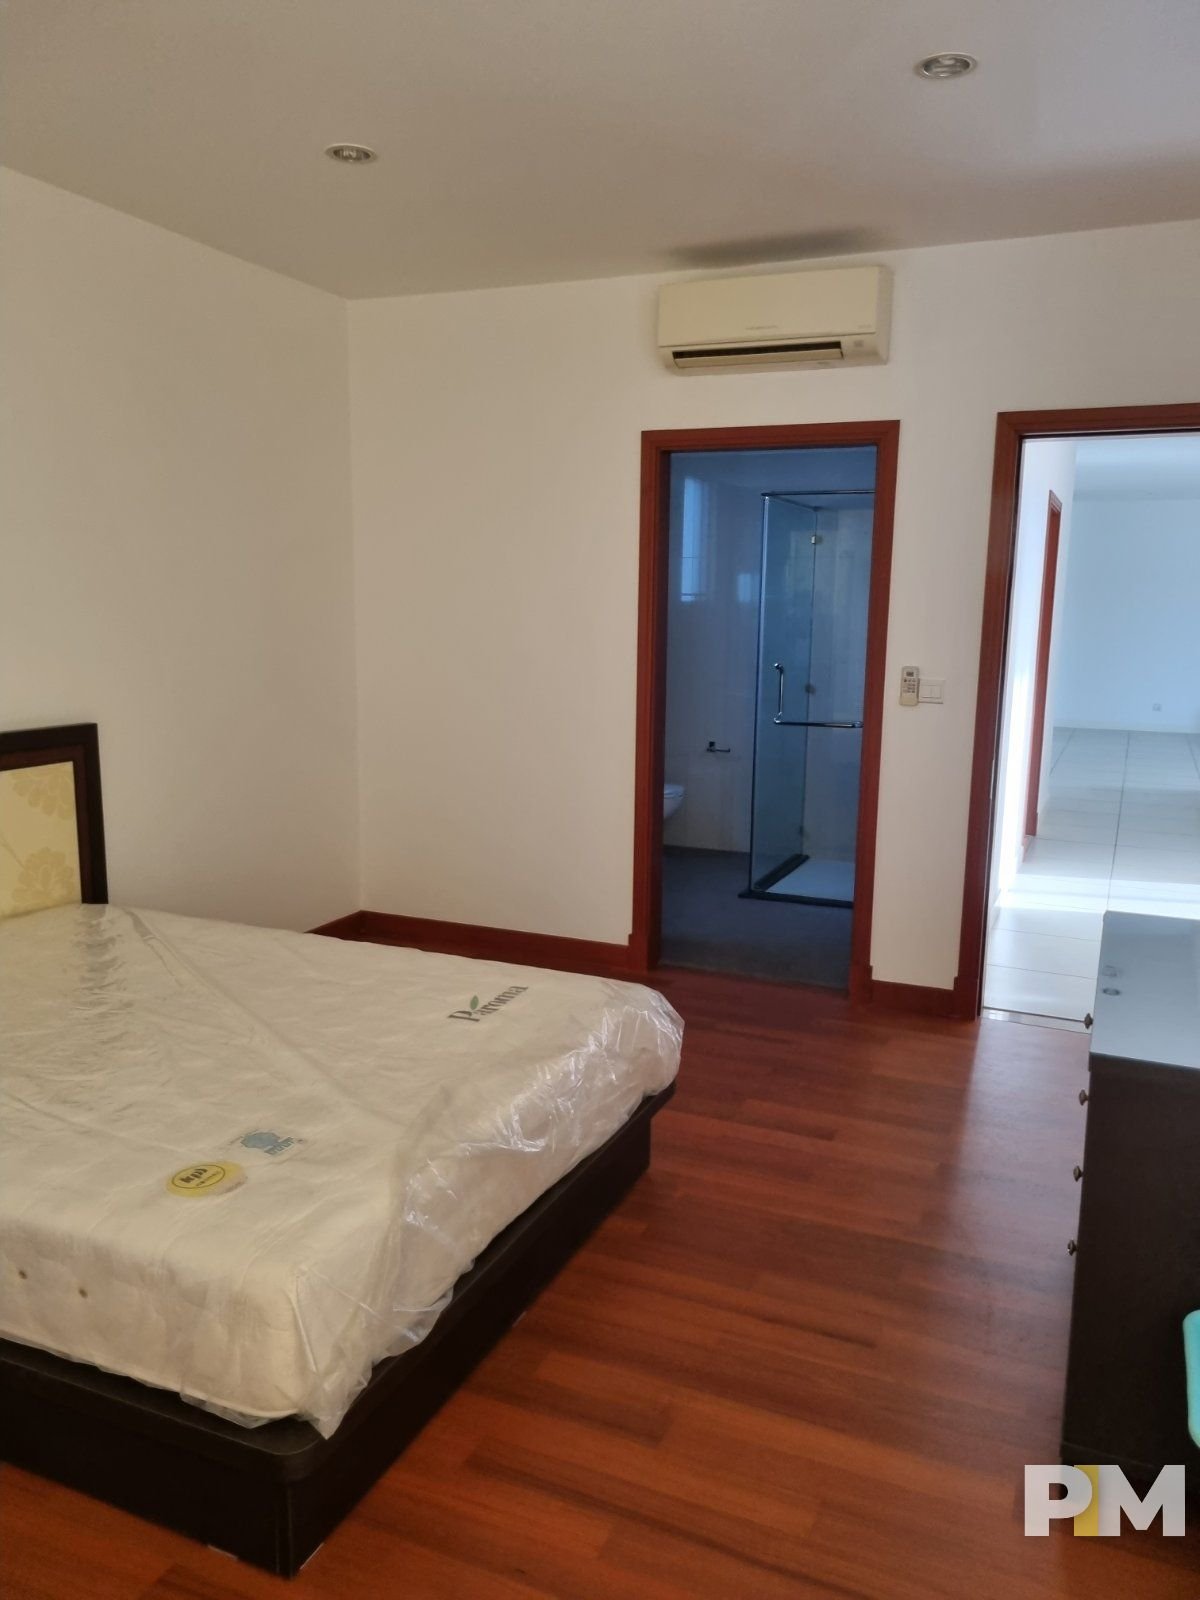 Bedroom with toilet - Real Estate in Yangon